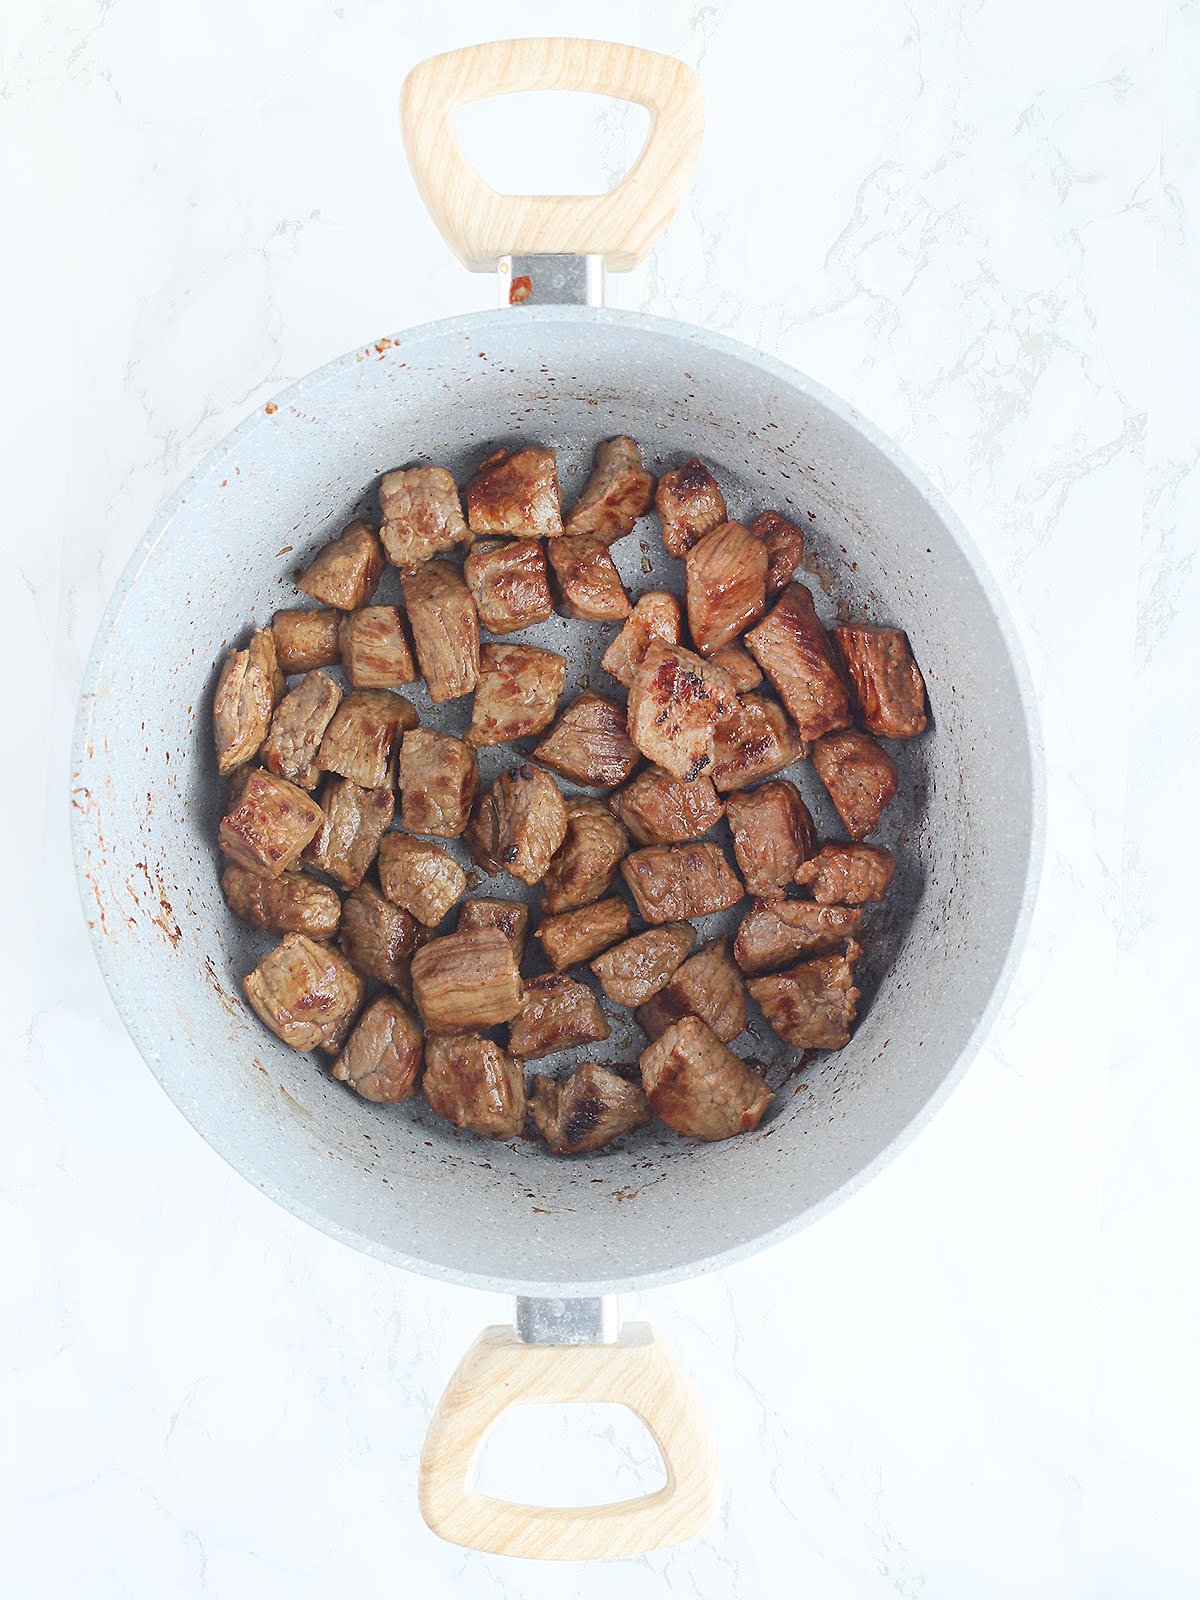 Seared cubes of beef in a stockpot.